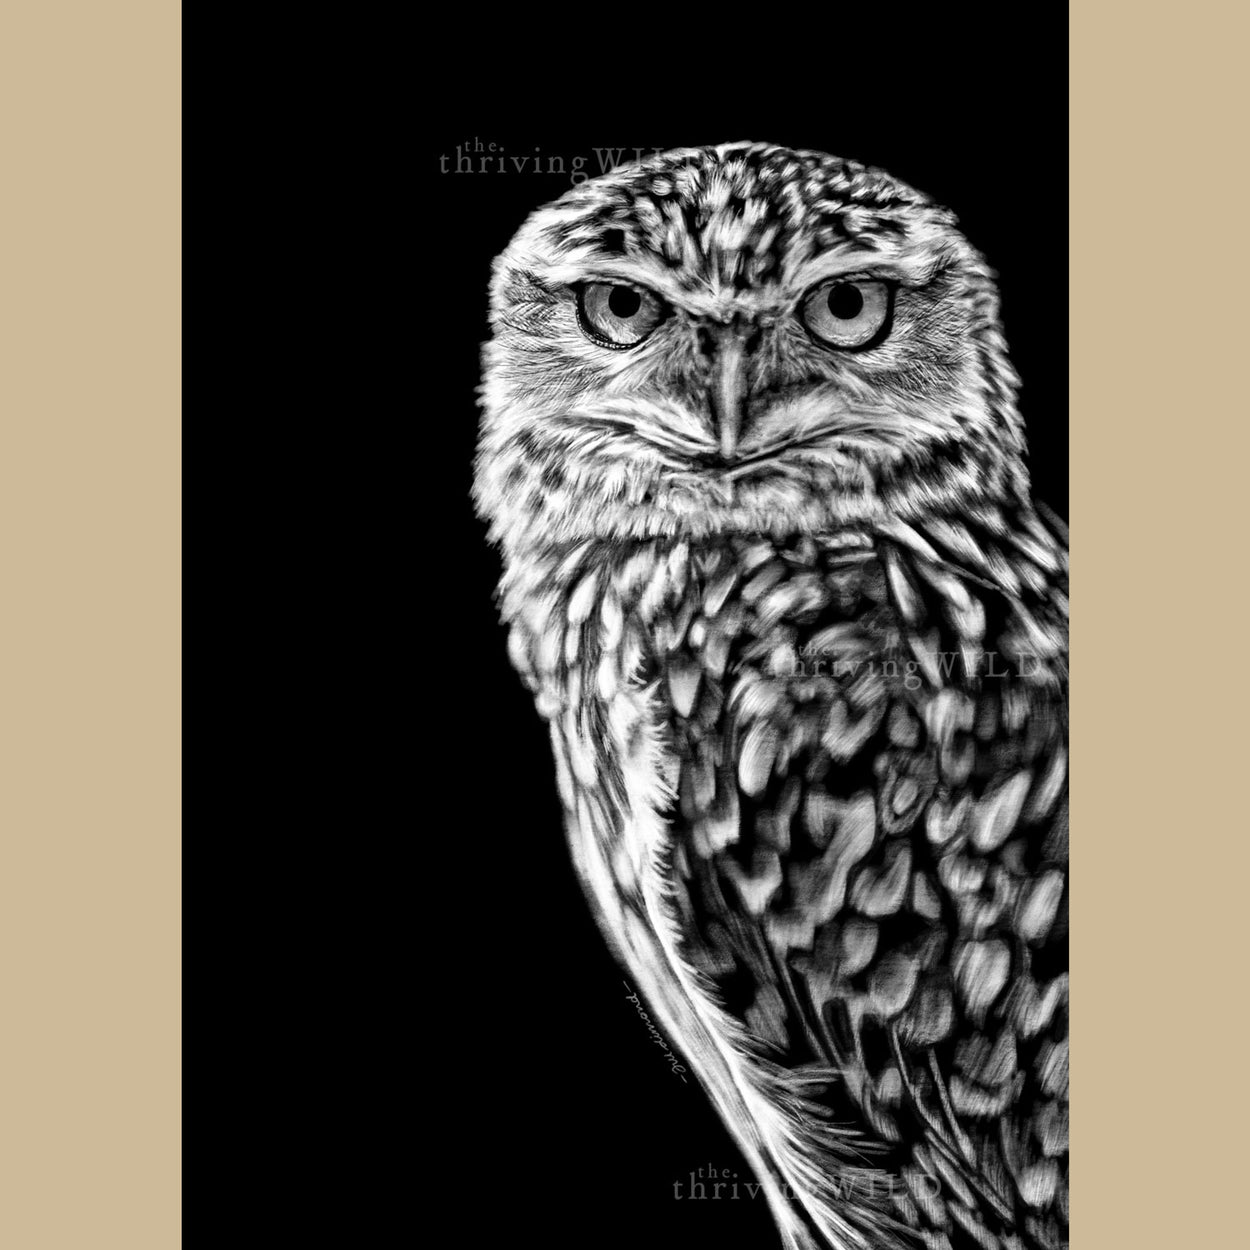 Burrowing Owl Procreate Digital Drawing - The Thriving Wild